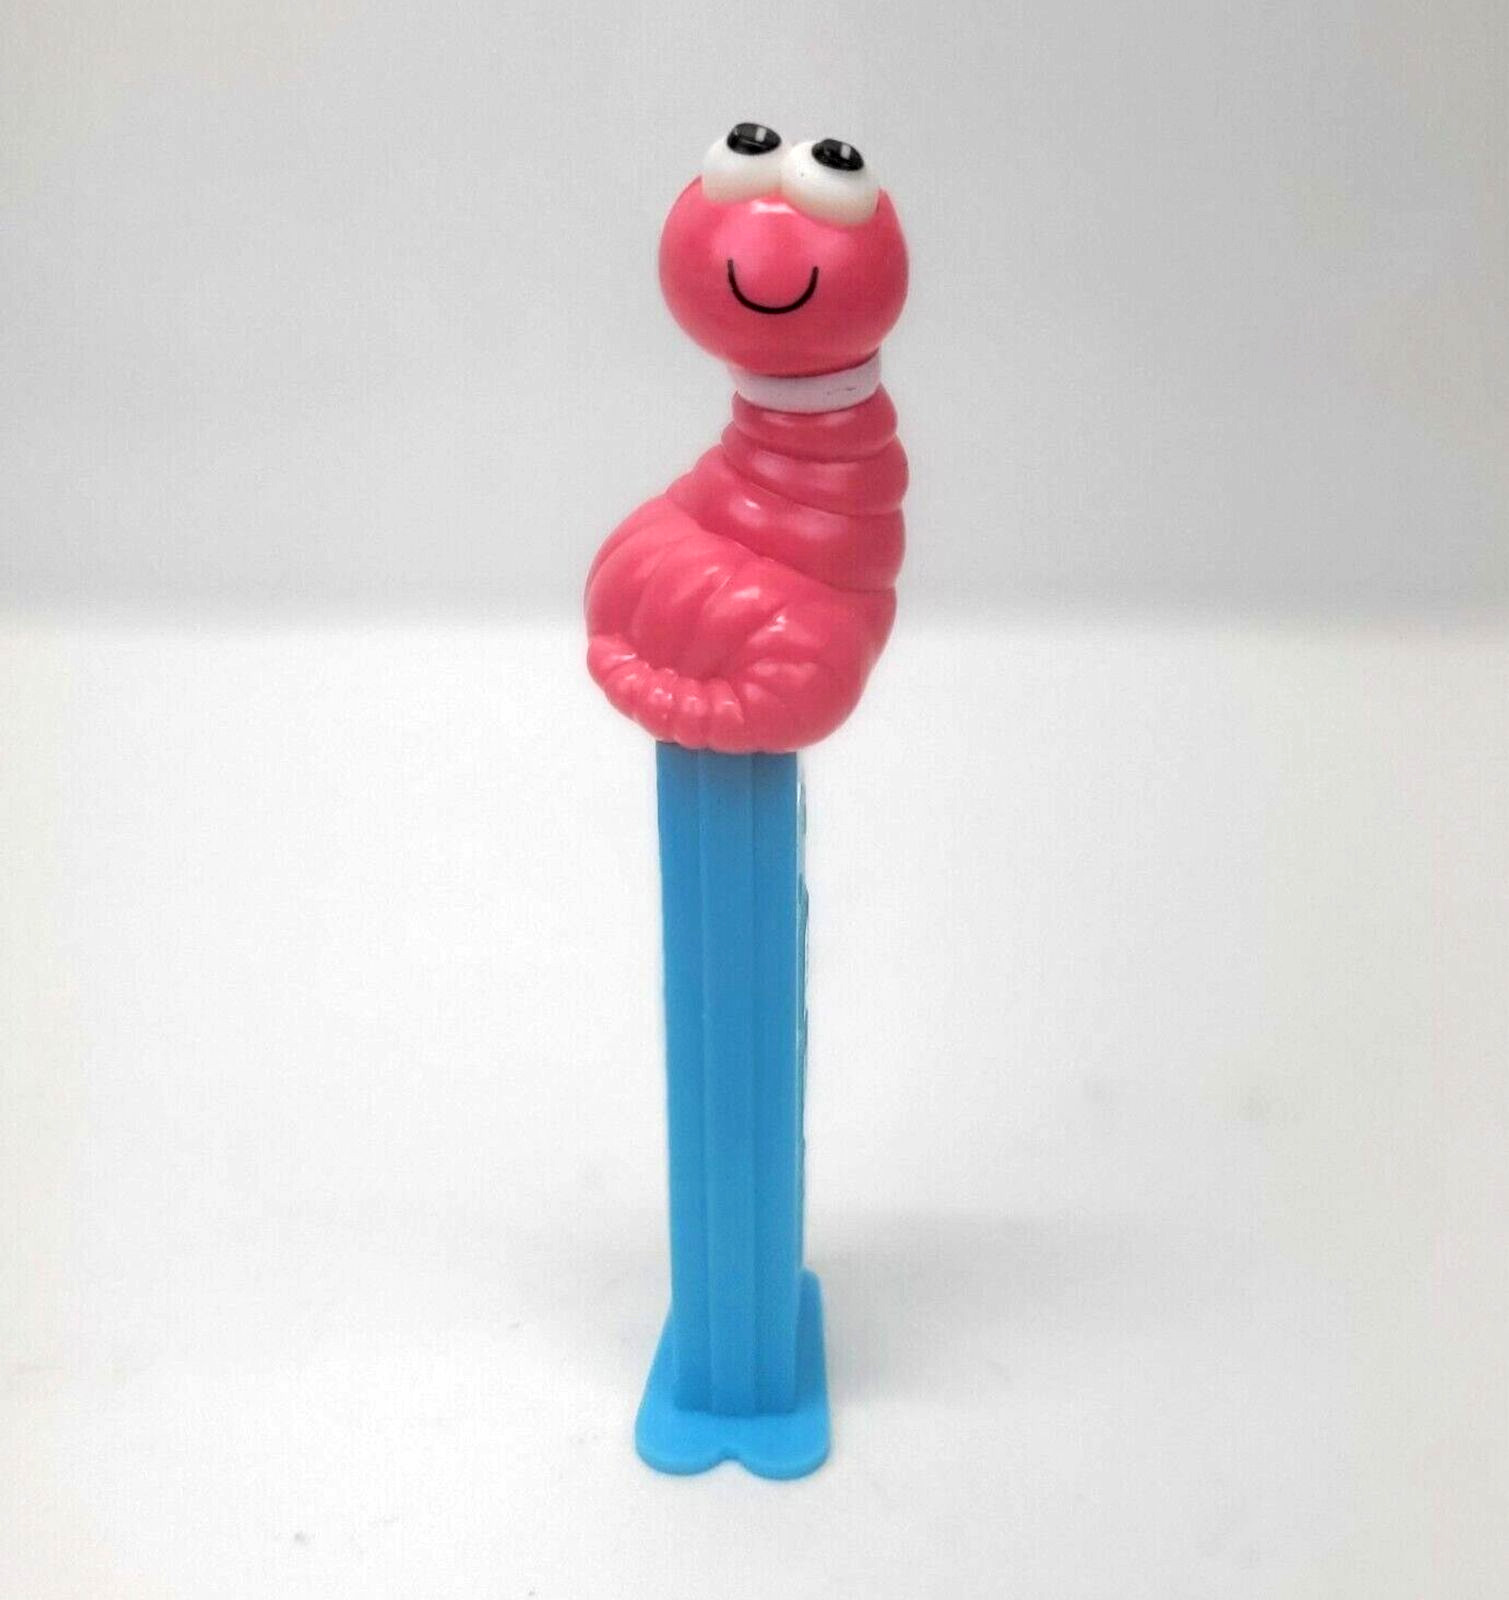 Pez Dispenser Bugz Clumsy Worm Made in Hungary 2000 Vintage